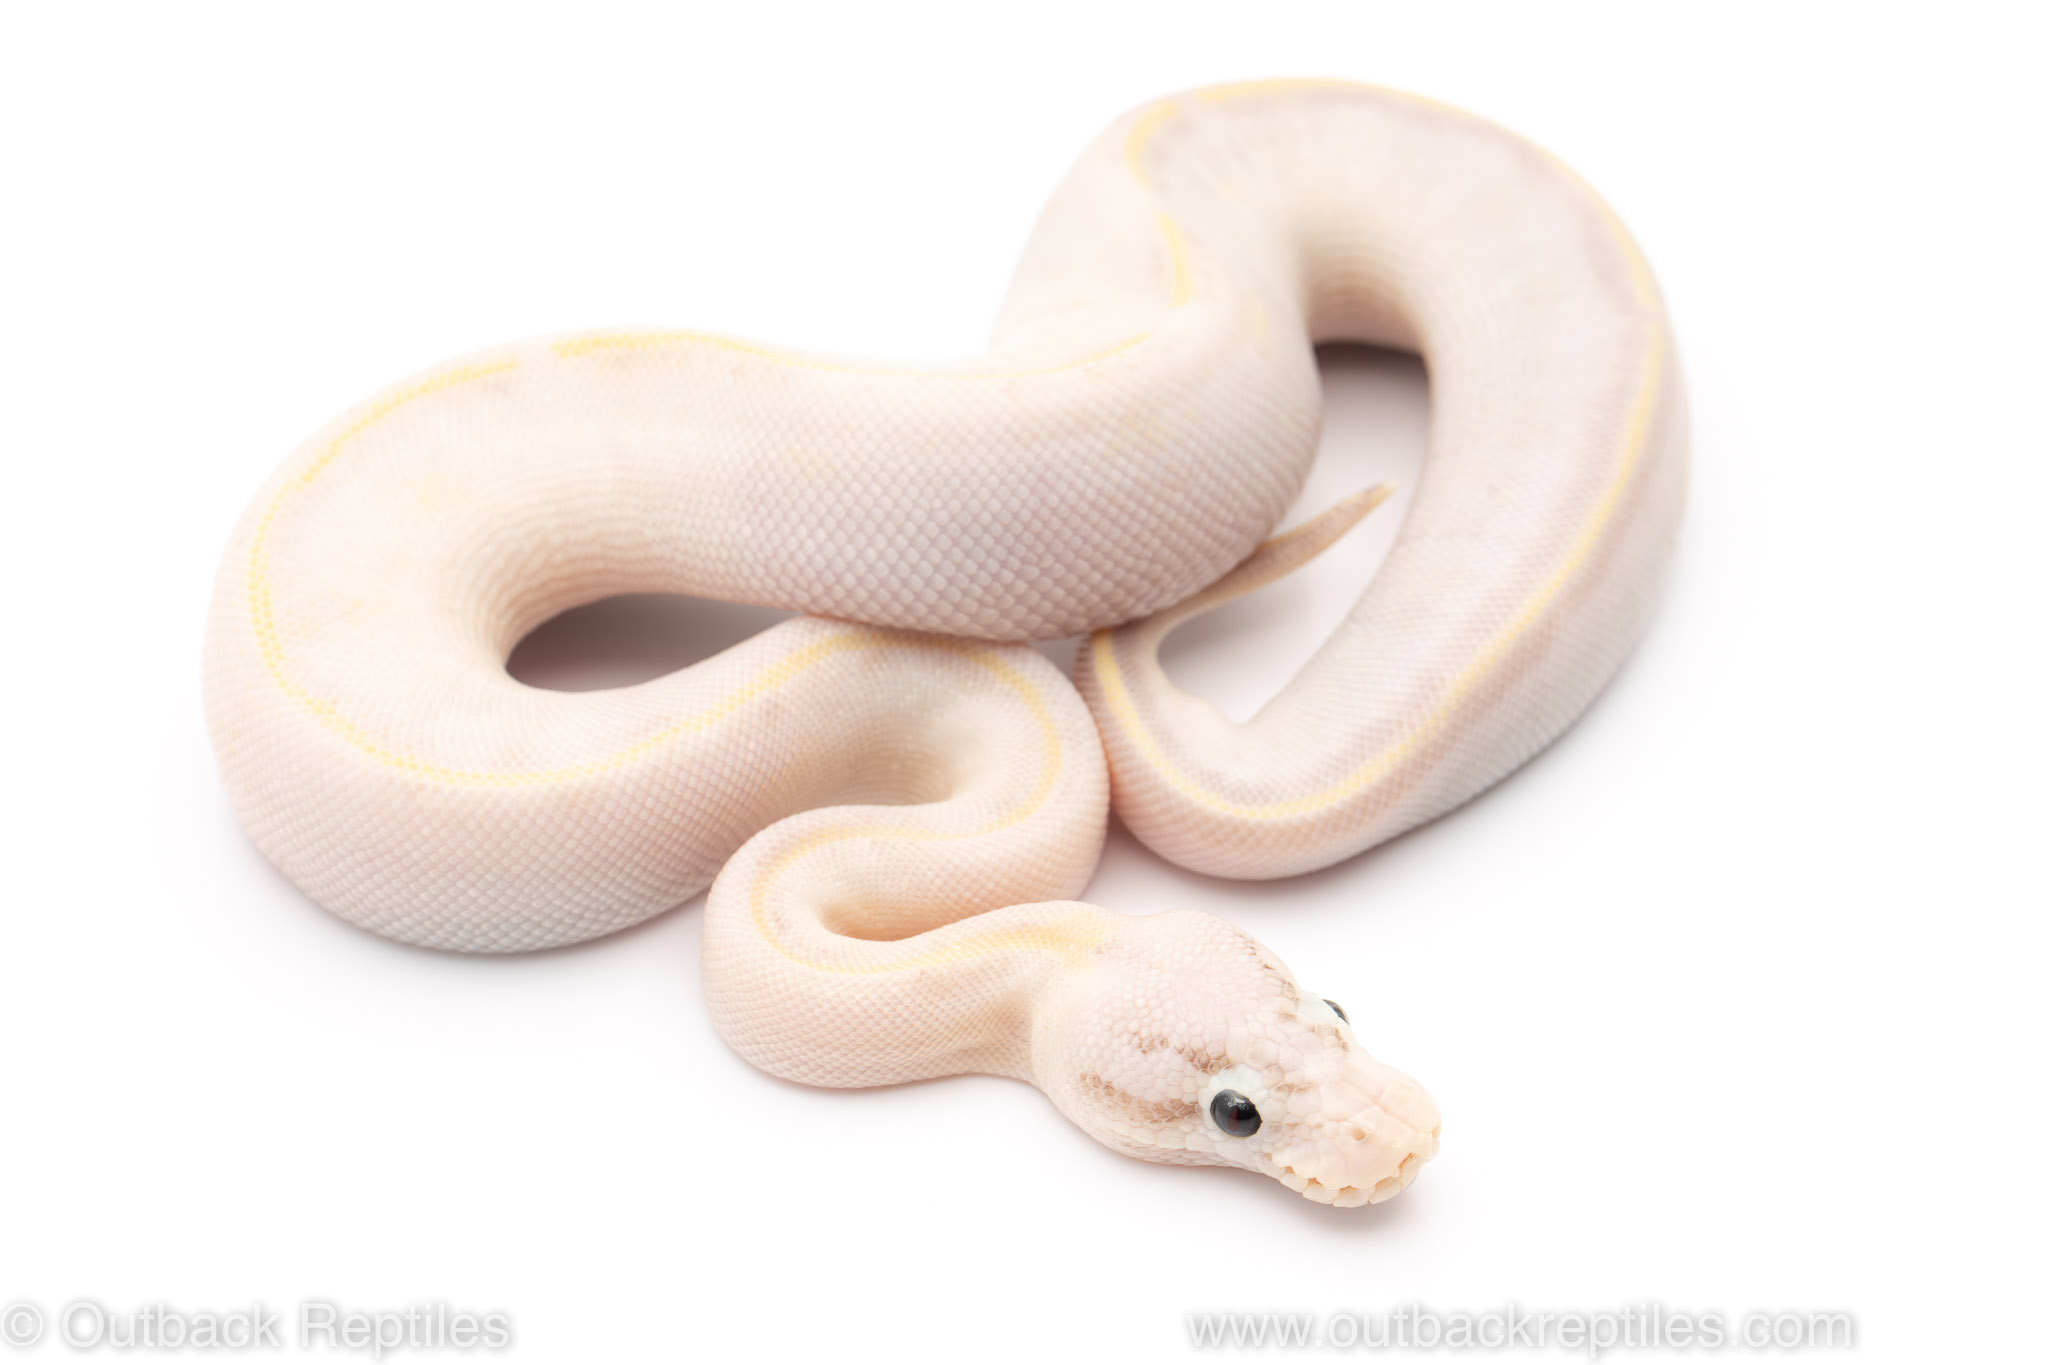 Pastel ivory ball python for sale